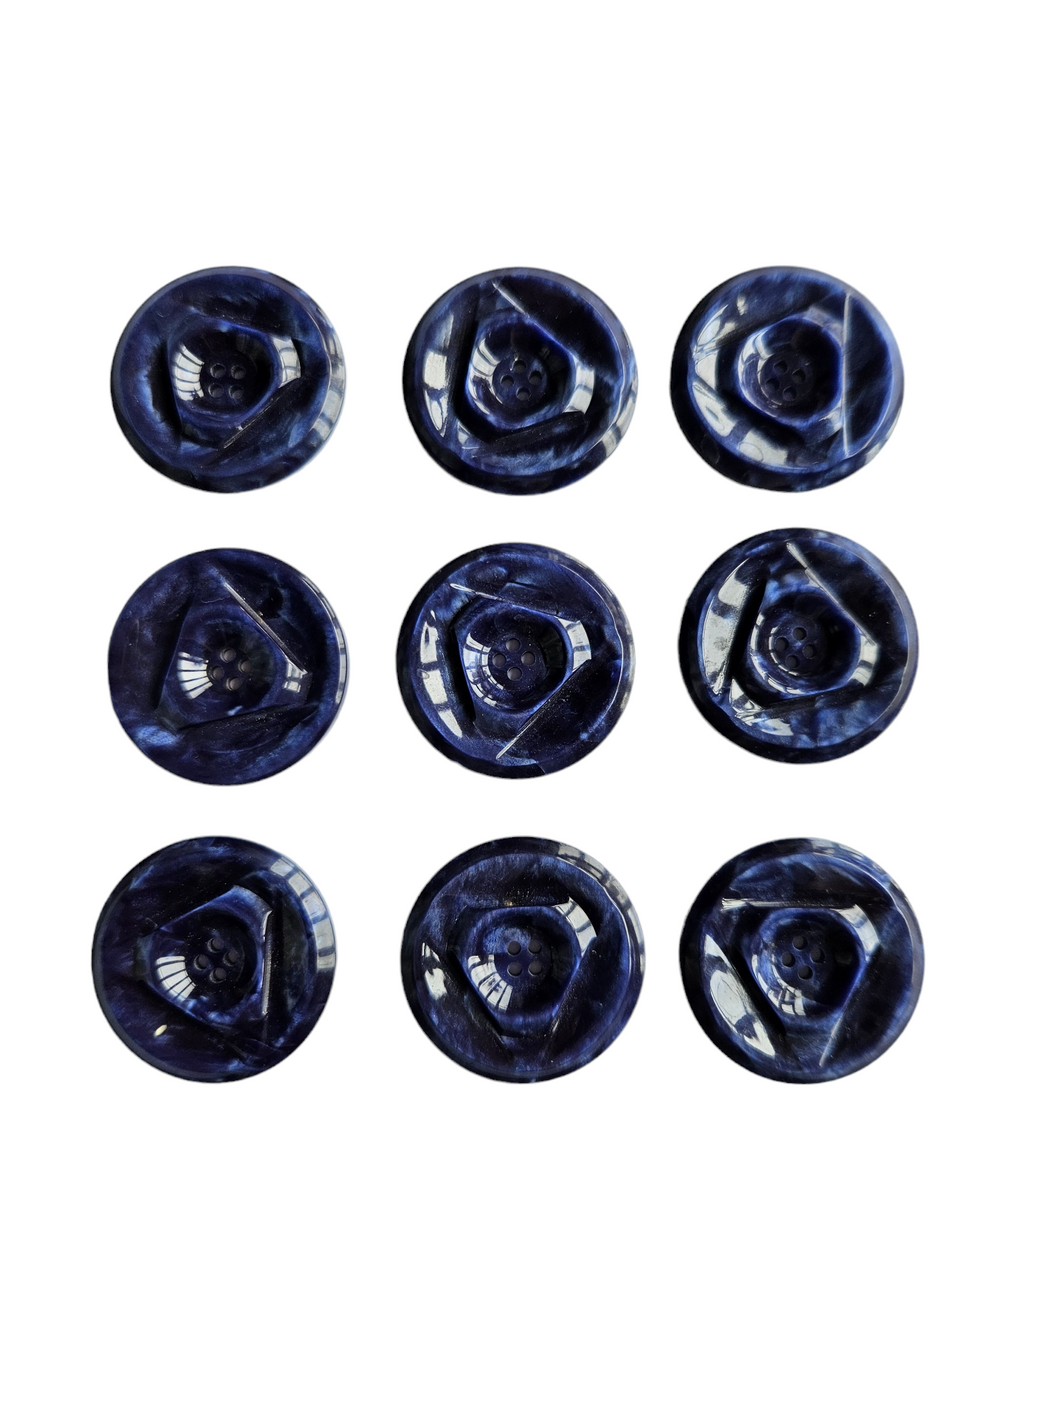 1940s Navy Blue Marbled Buttons